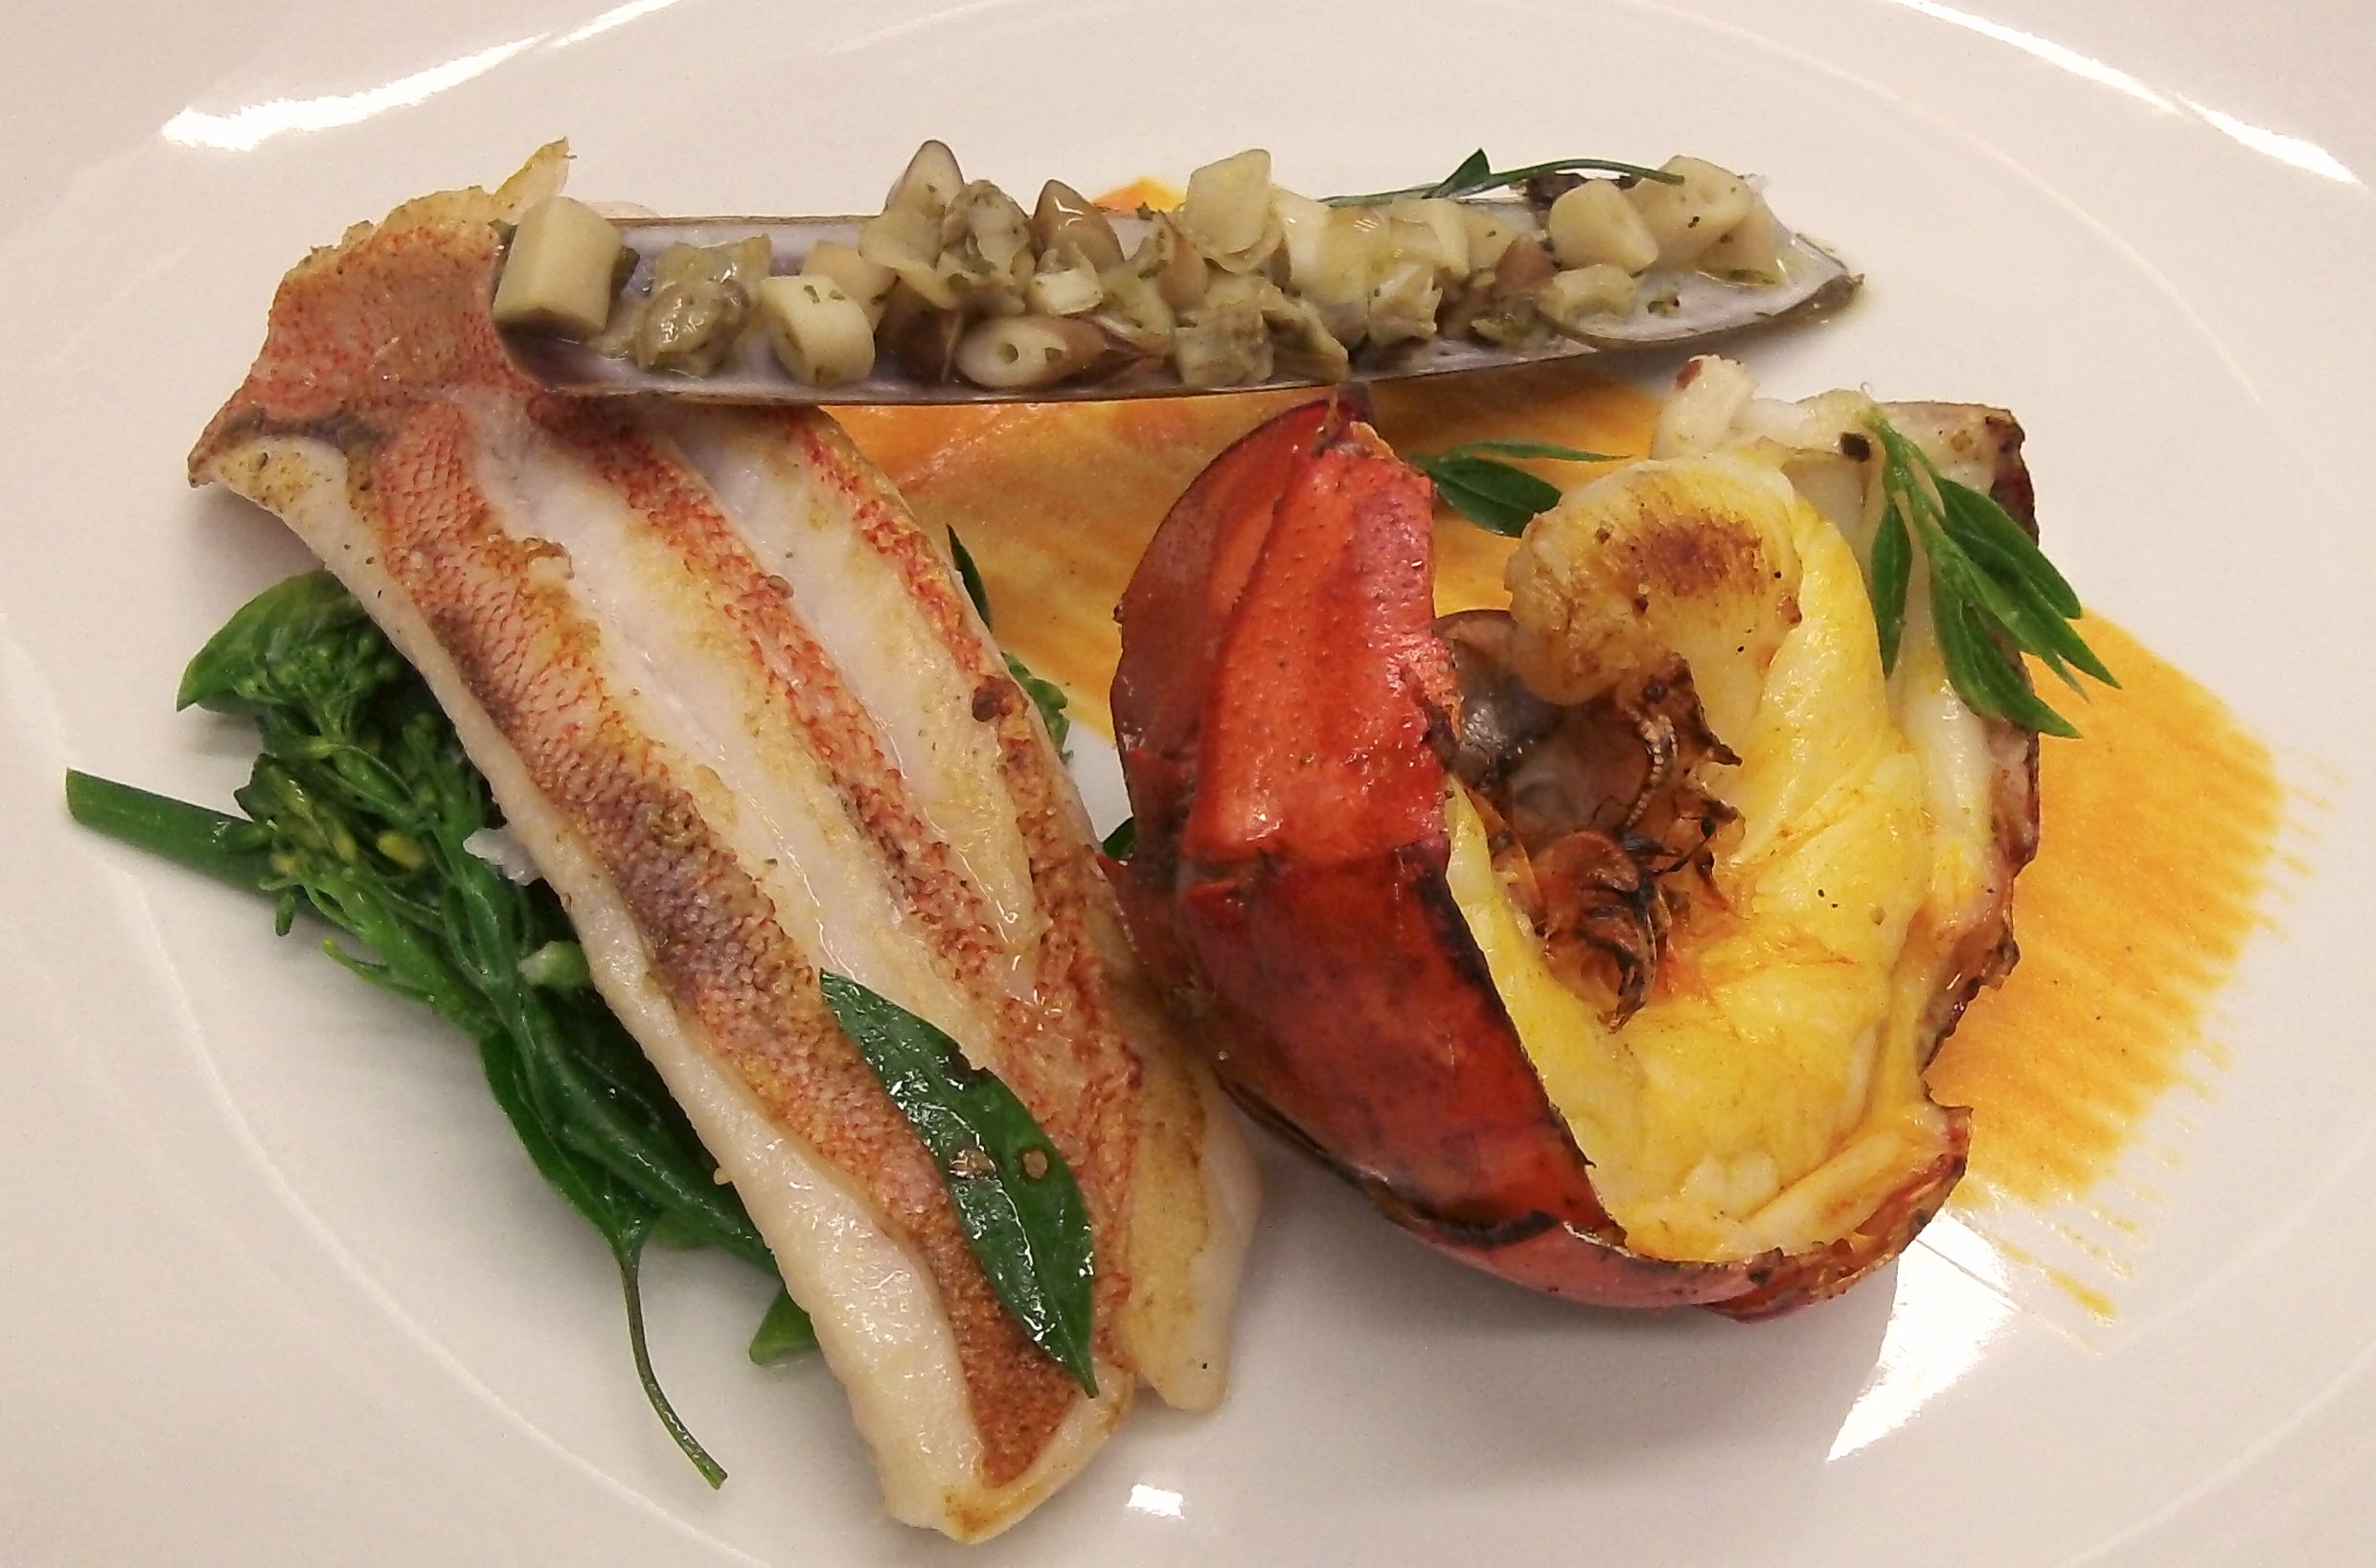 Arcadian Redfish with Madras Curried Lobster Tail, Pickled Razor Clams, Lambs' Quarters, Fricasse of Fall Vegetables, and Red Pepper Rouille